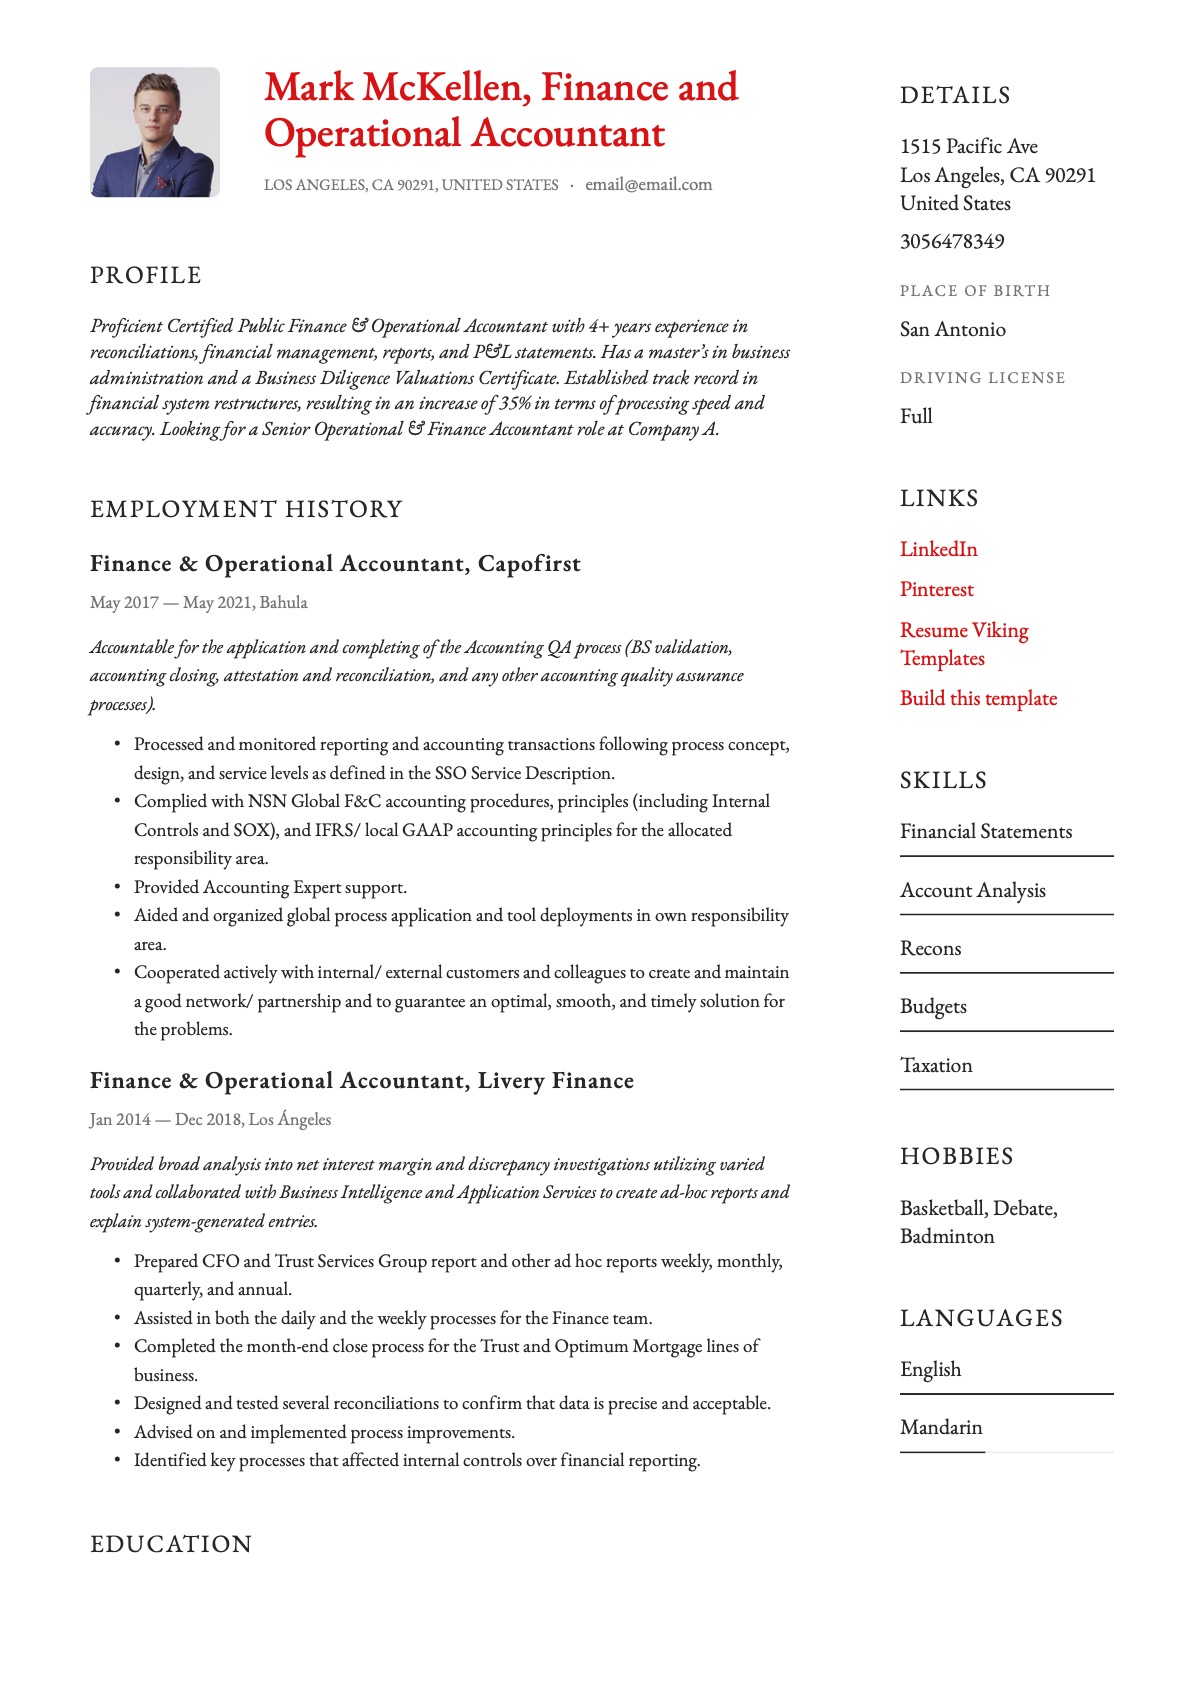 Simple Finance & Operational Accountant Resume